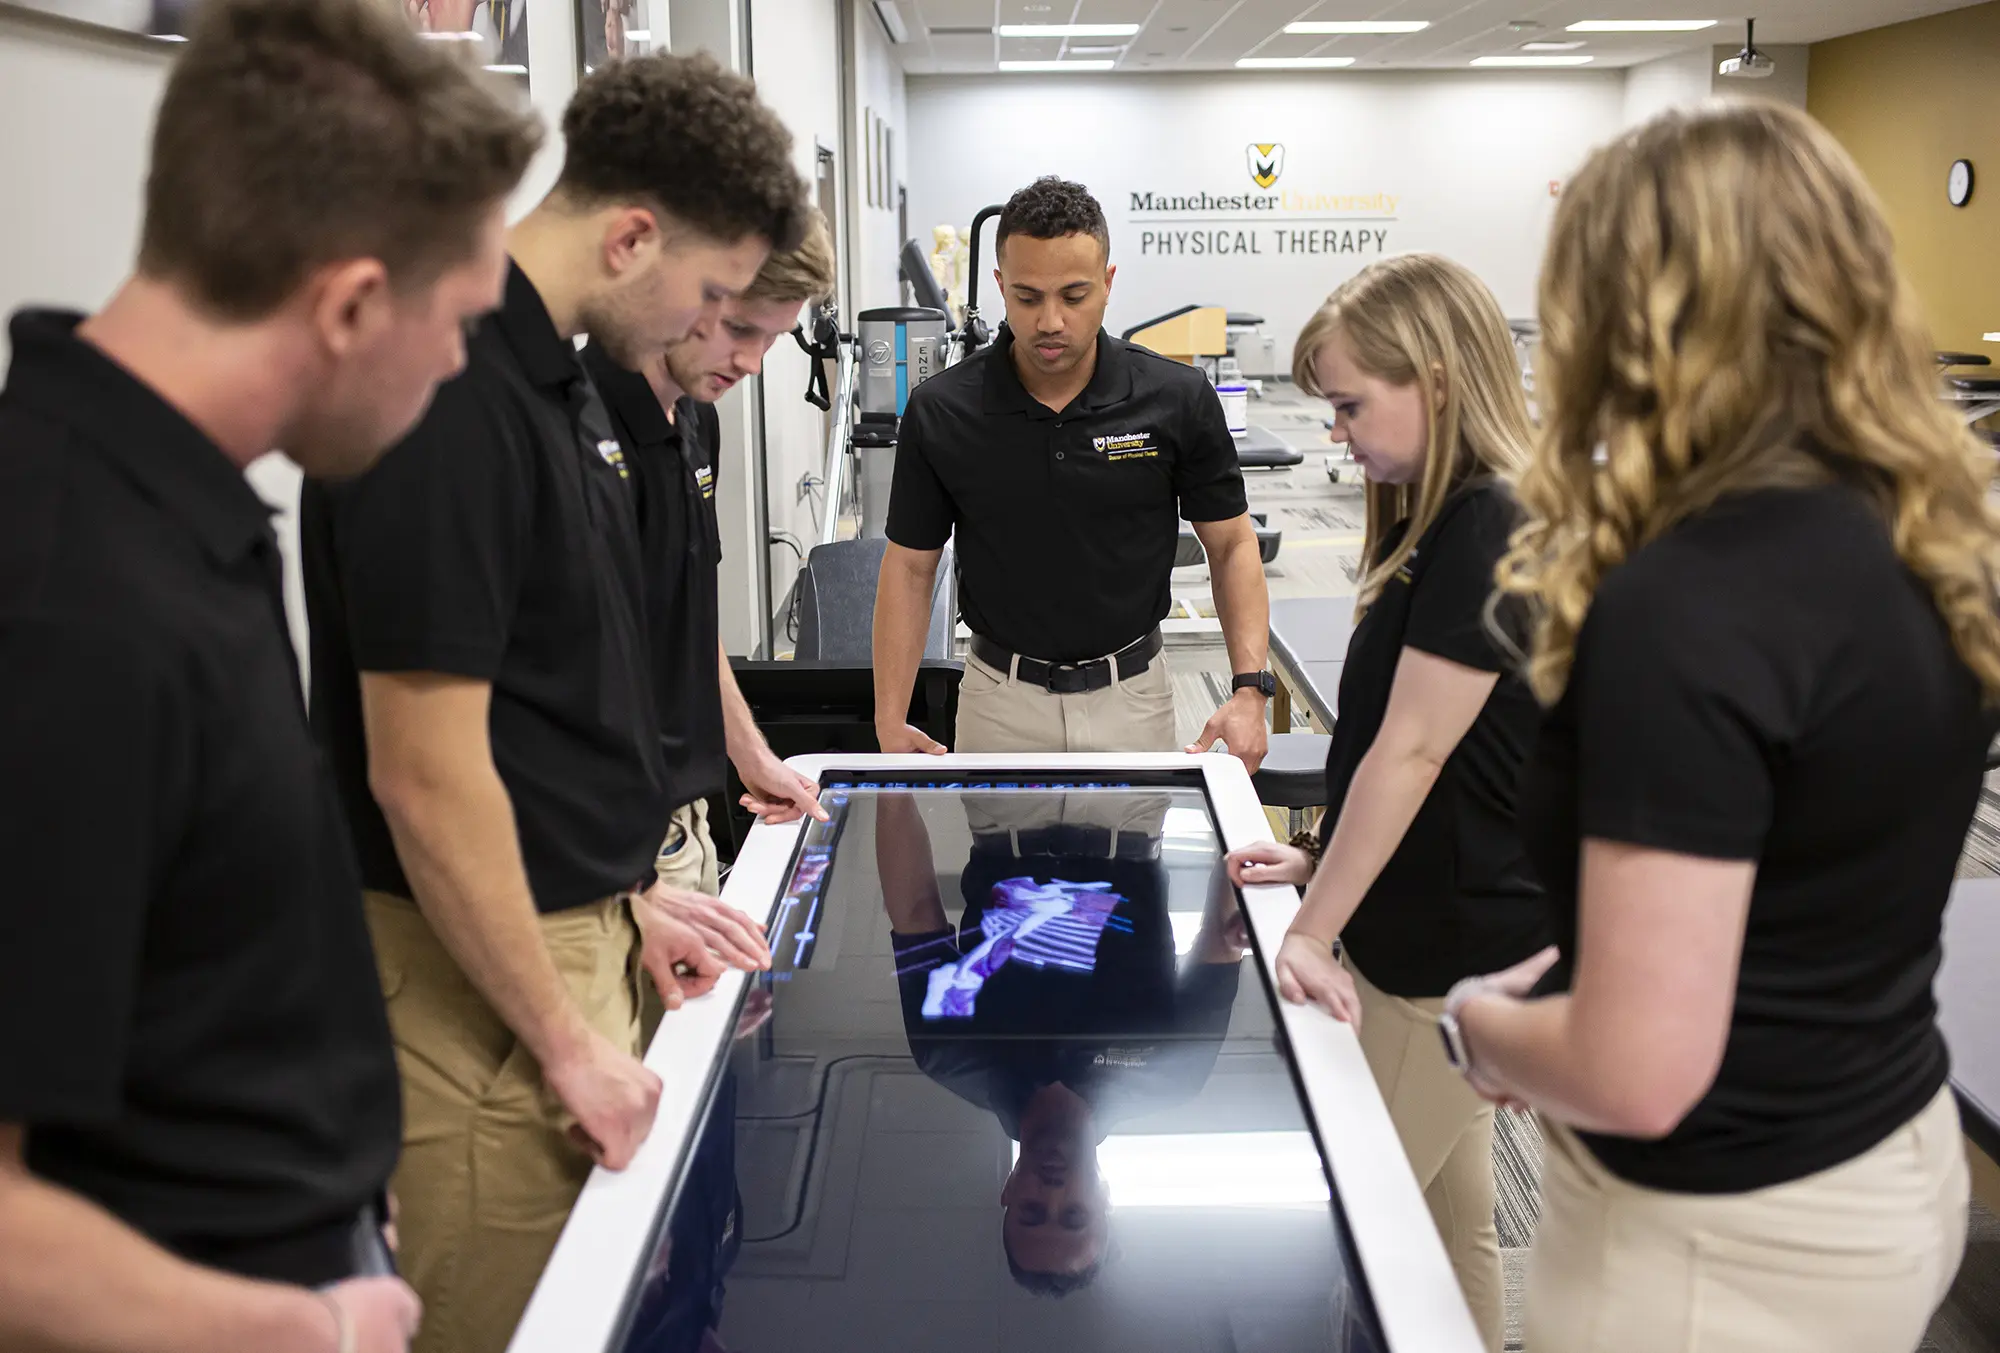 Six Manchester University Physical Therapy students (four men plus two women) inside a room glance downward at a black touchscreen that displays a three-dimensional x-ray scan of a body part with other helpful beneficial informational icon buttons on the side and at the bottom of the black touchscreen